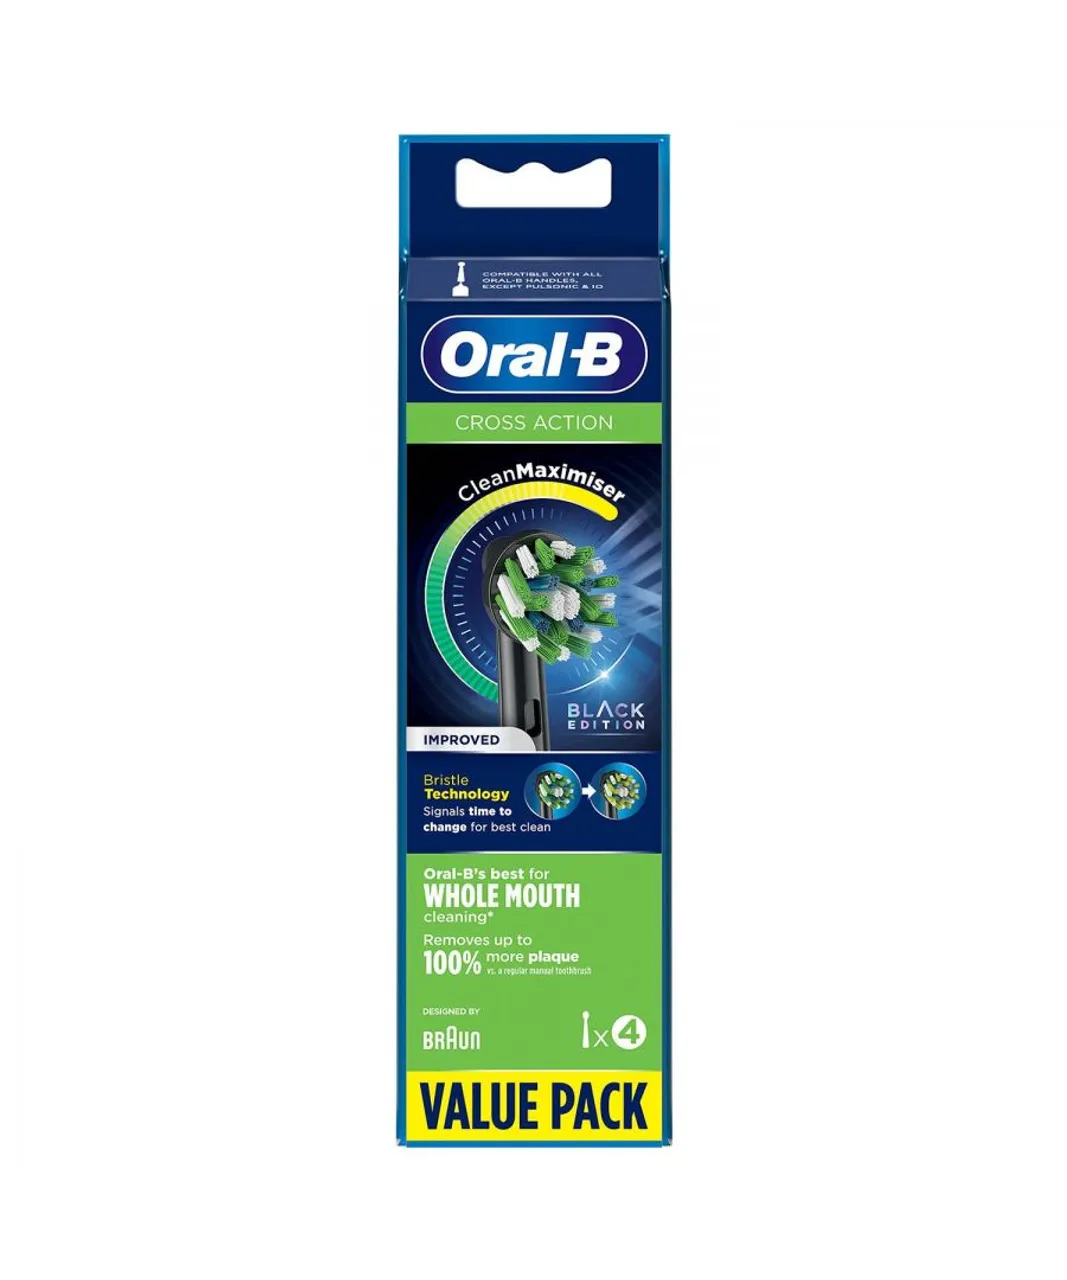 Oral B Unisex Oral-B Cross Action Black Clean Maximiser Replacement Toothbrush Head, Pack of 4 - One Size